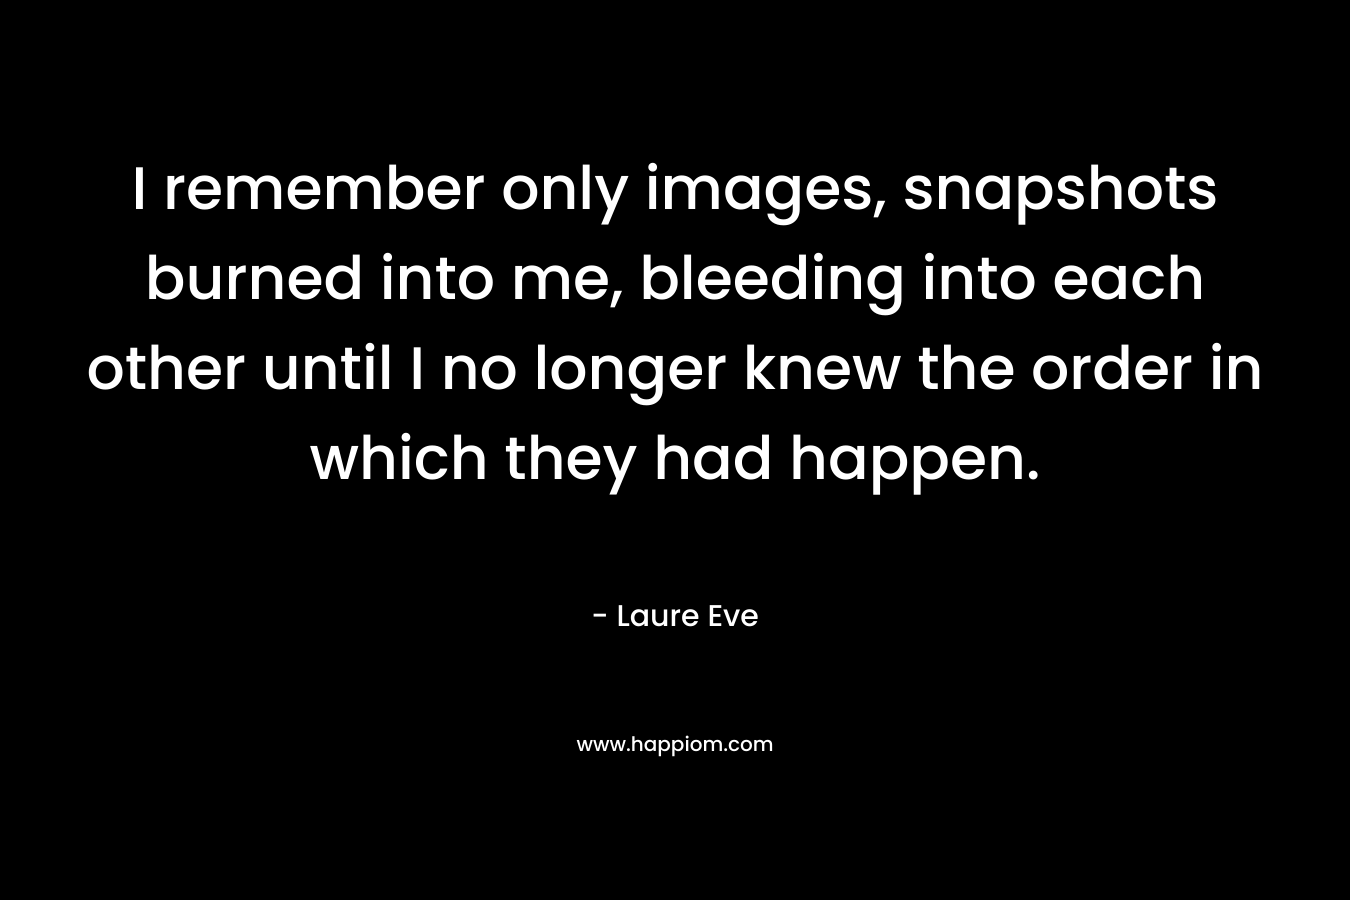 I remember only images, snapshots burned into me, bleeding into each other until I no longer knew the order in which they had happen.